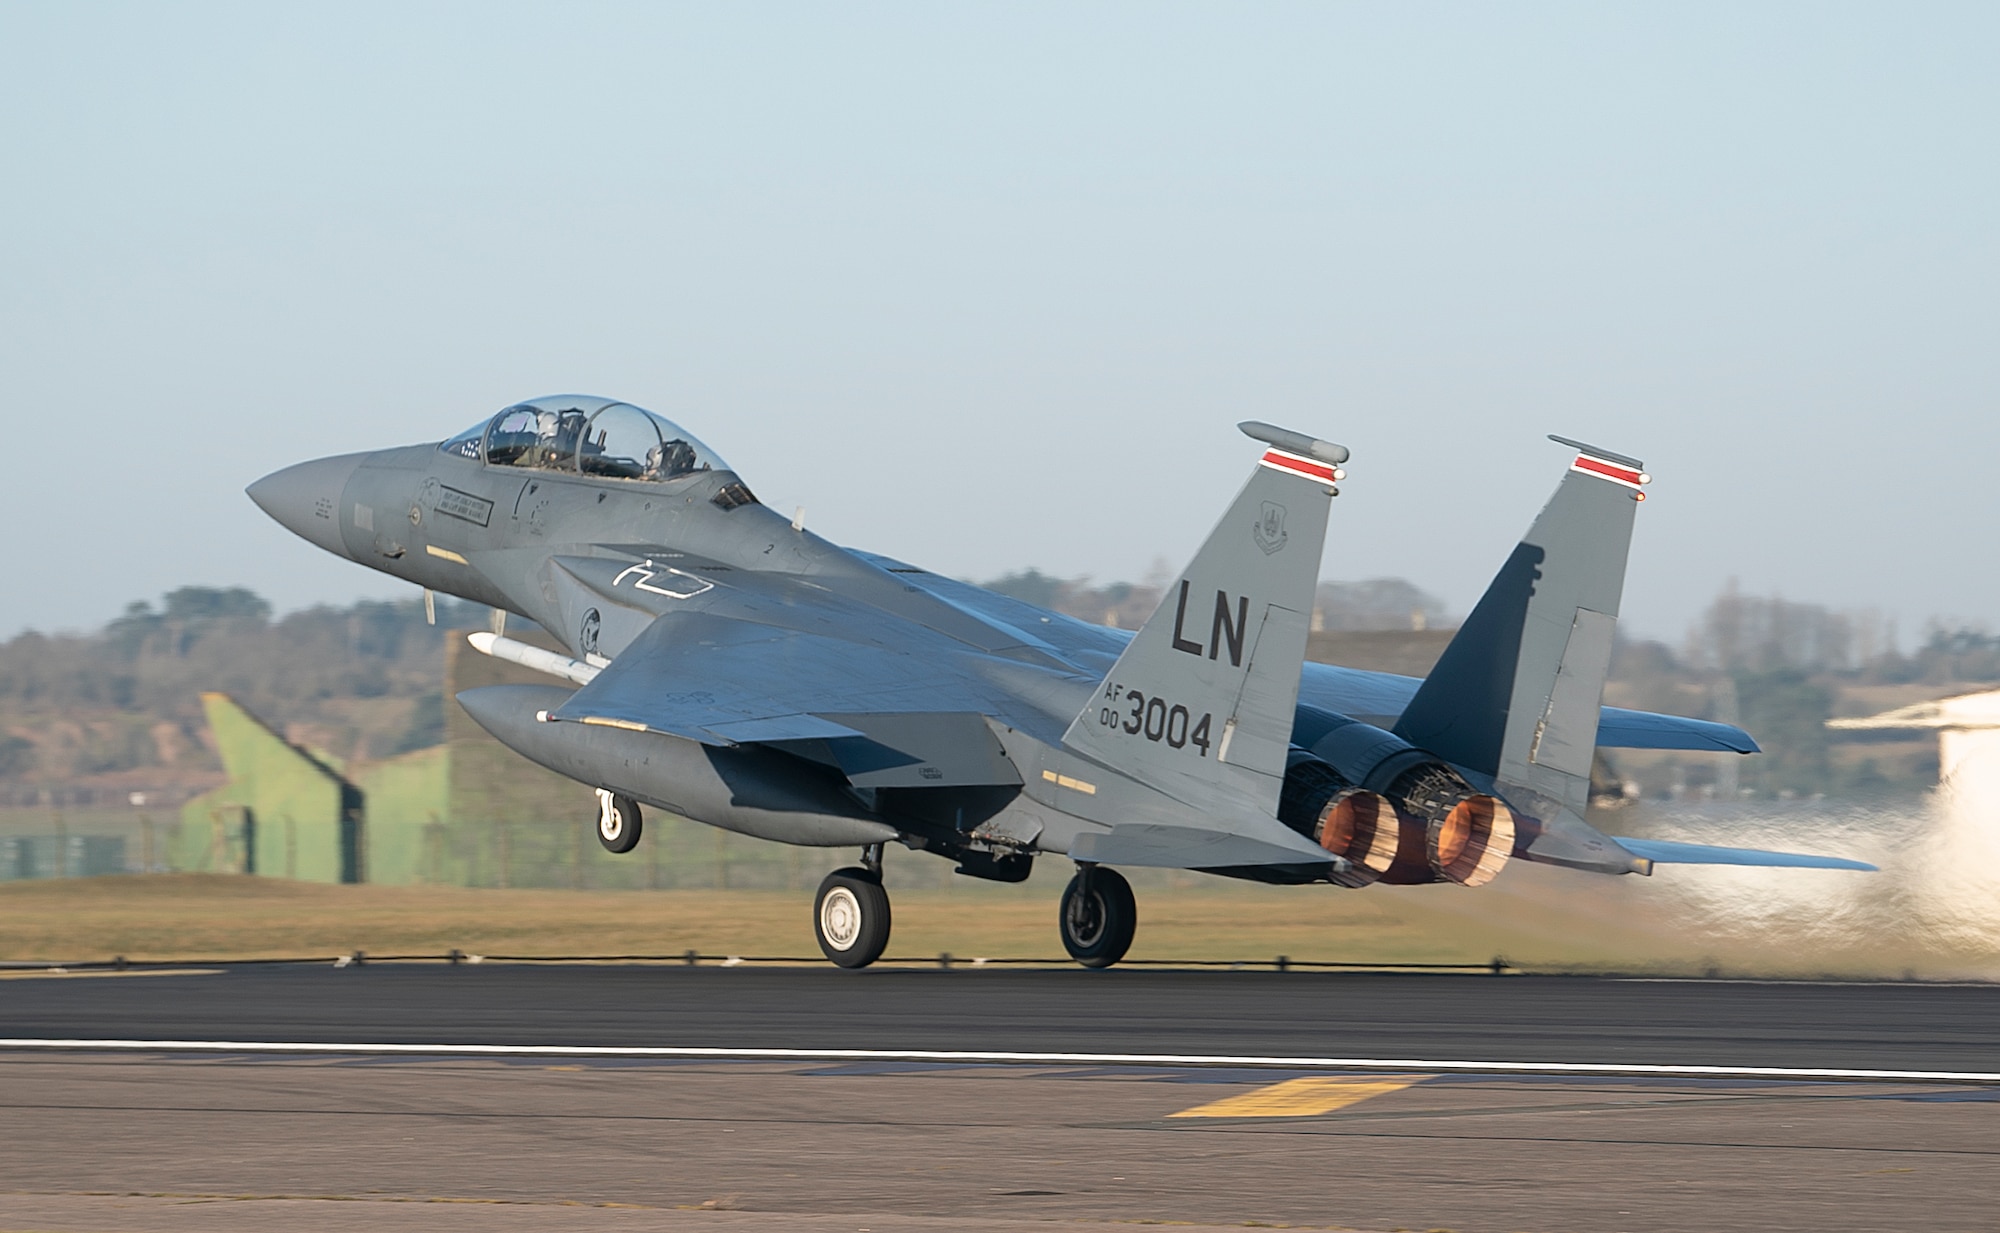 An F-15E Strike Eagle assigned to the 494th Fighter Squadron takes off for an orientation flight at Royal Air Force Lakenheath, England, Feb. 26, 2021. Prior to an orientation flight, candidates must pass a flight physical, be fitted for gear with Aircrew Flight Equipment and attend numerous briefings including egress and harness training. (U.S. Air Force photo by Airman 1st Class Jessi Monte)